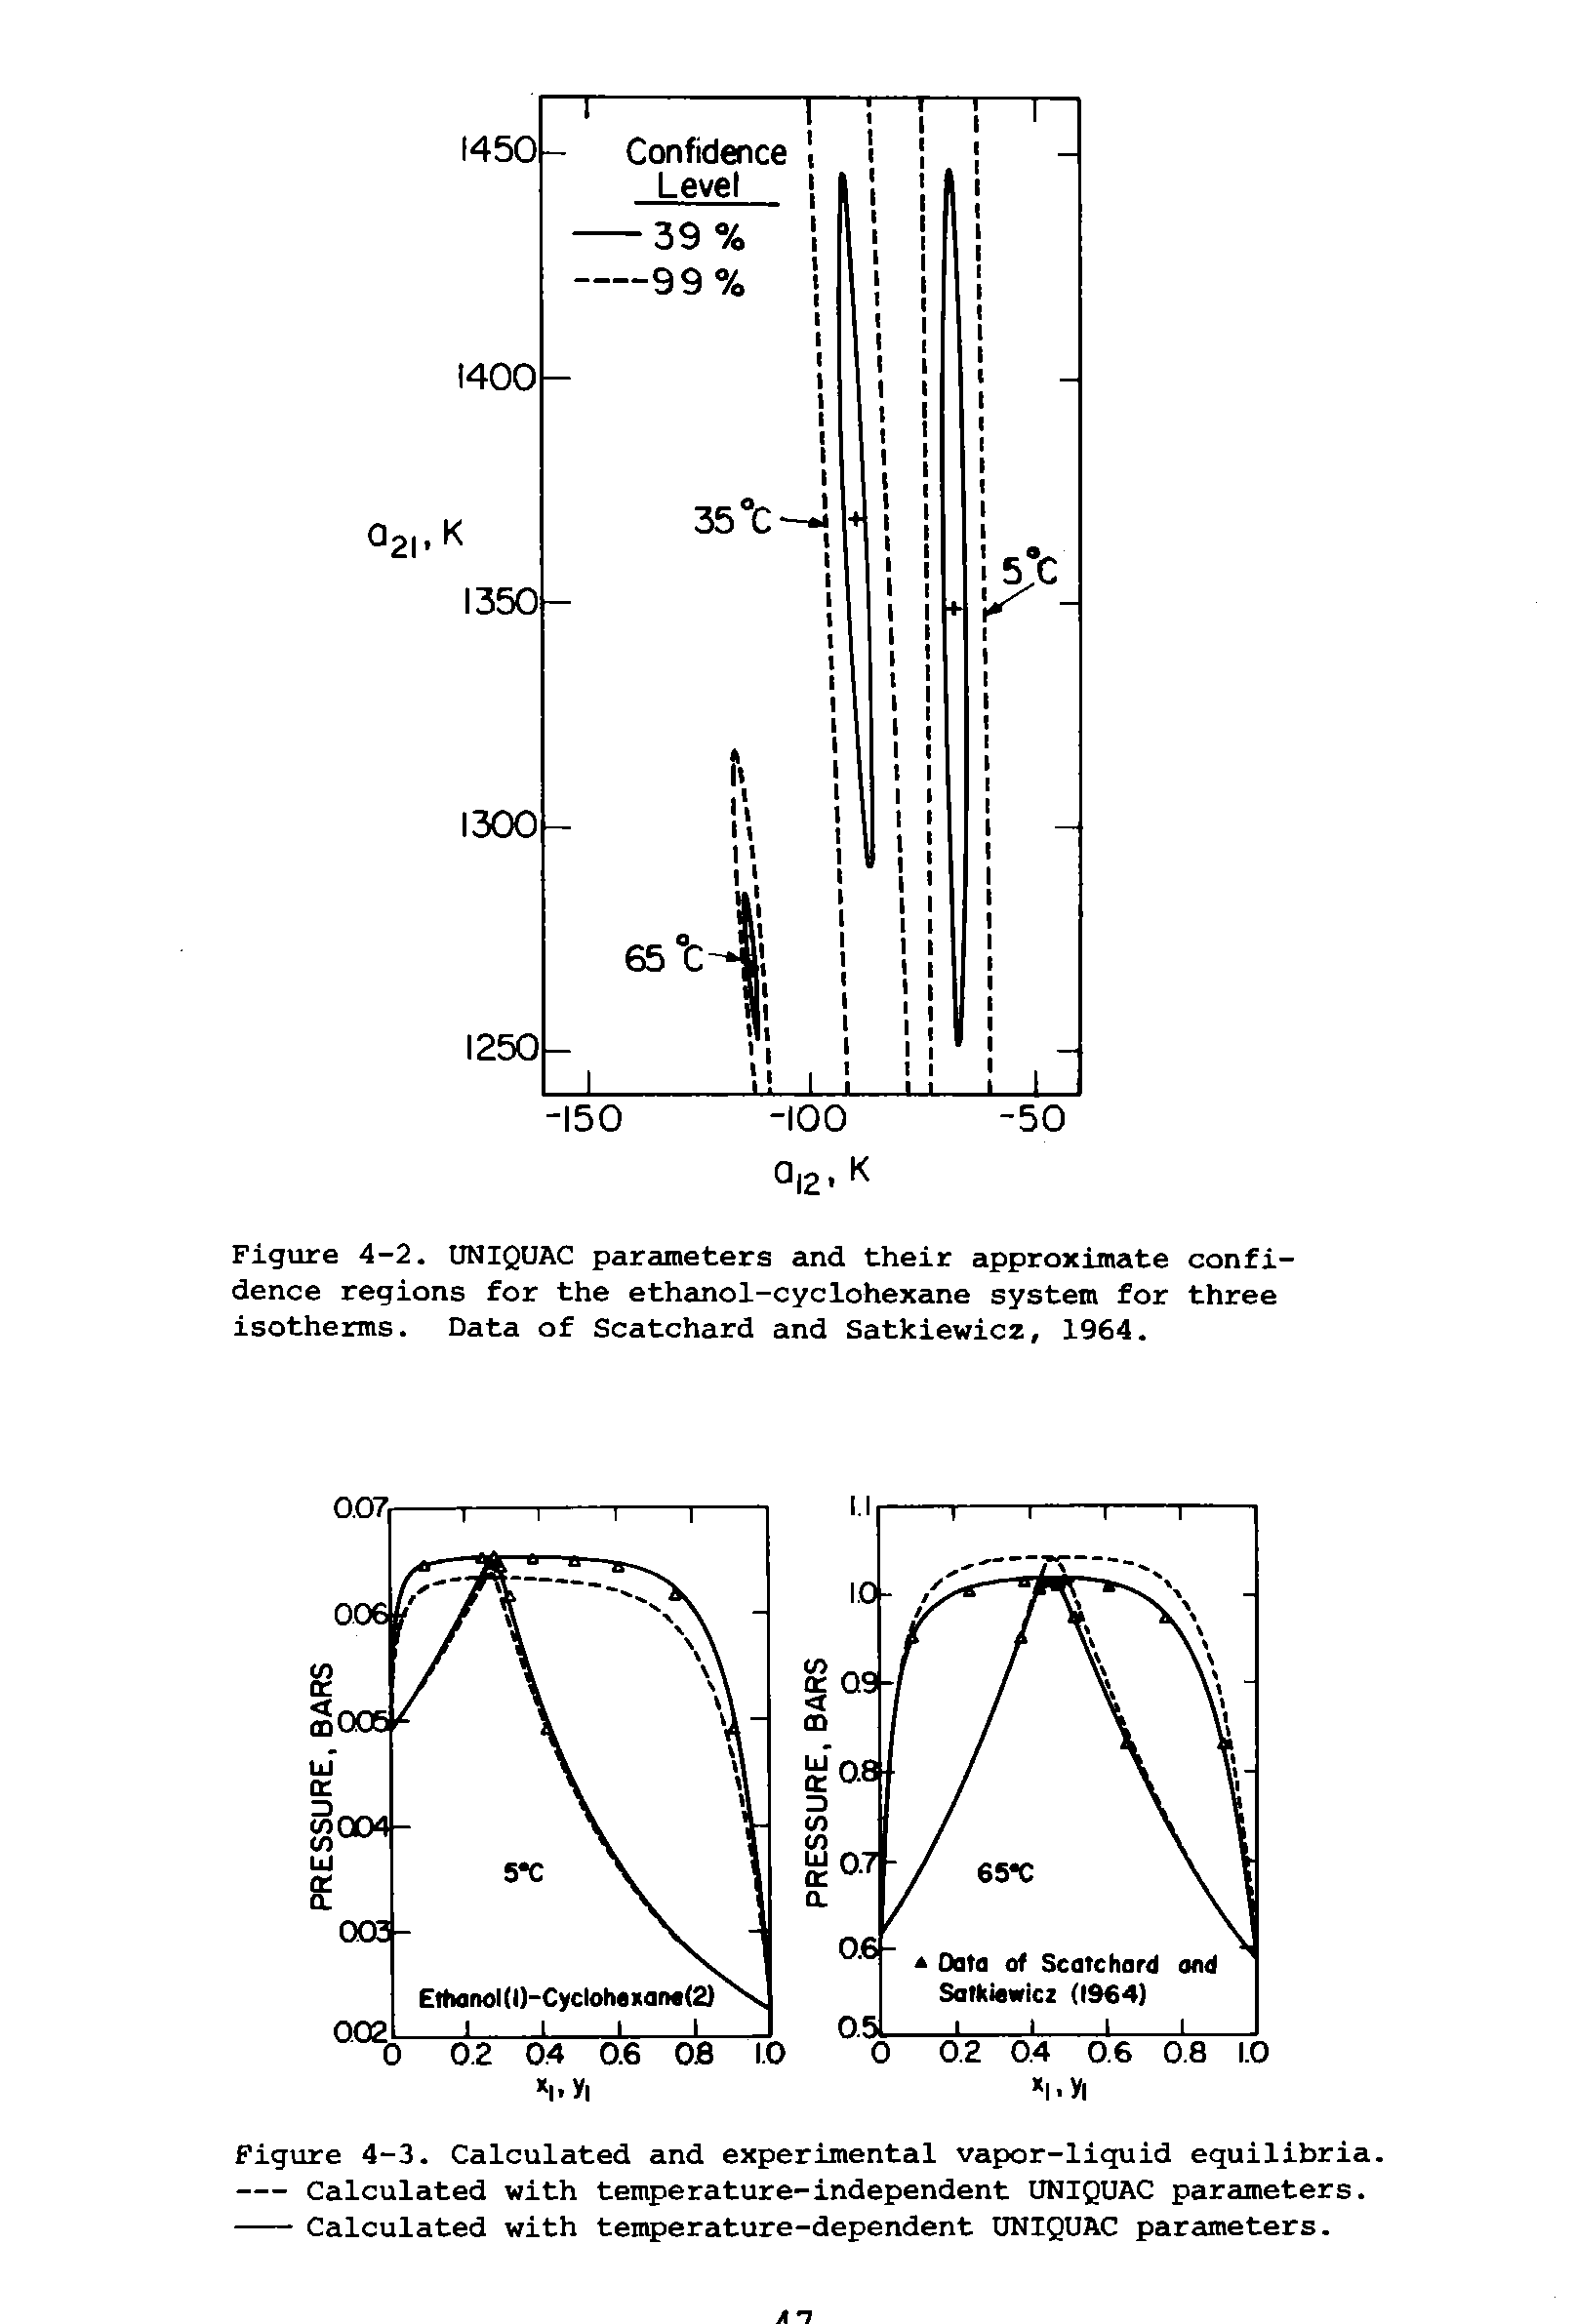 Figure 4-2. UNIQUAC parameters and their approximate confidence regions for the ethanol-cyclohexane system for three isotherms. Data of Scatchard and Satkiewicz, 1964.